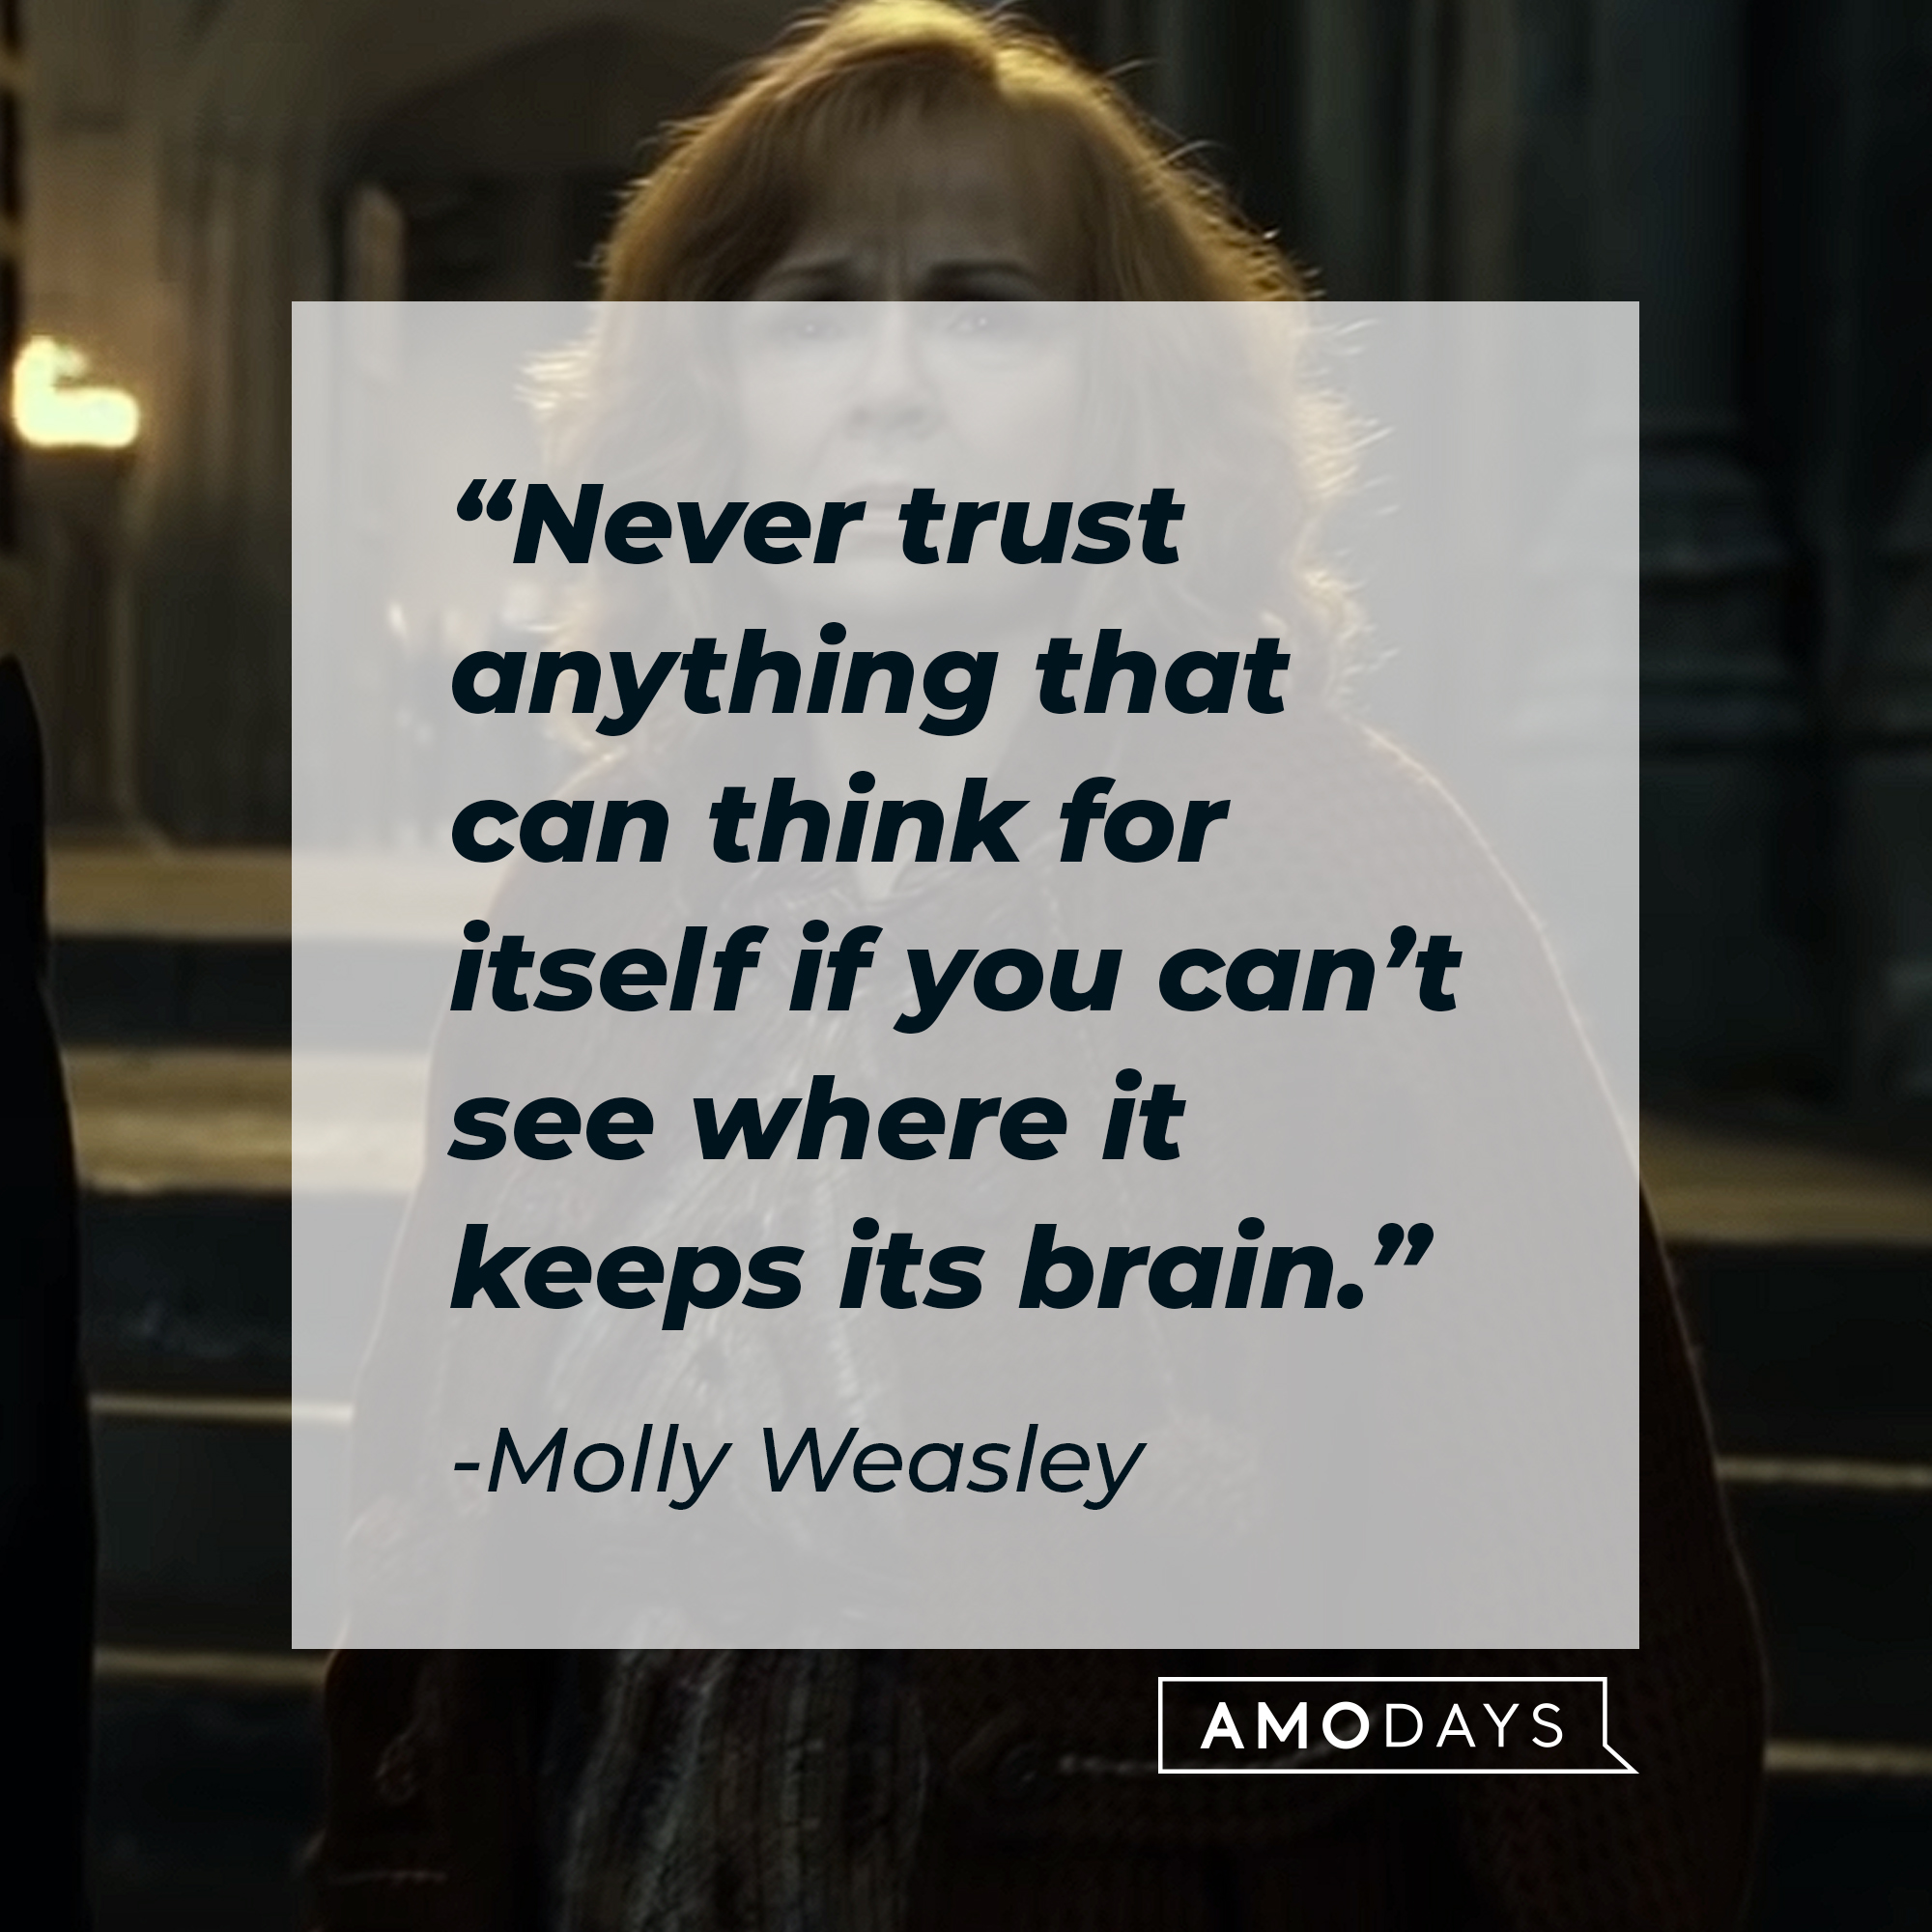 Molly Weasley's quote: "Never trust anything that can think for itself if you can’t see where it keeps its brain." | Source: Youtube.com/harrypotter